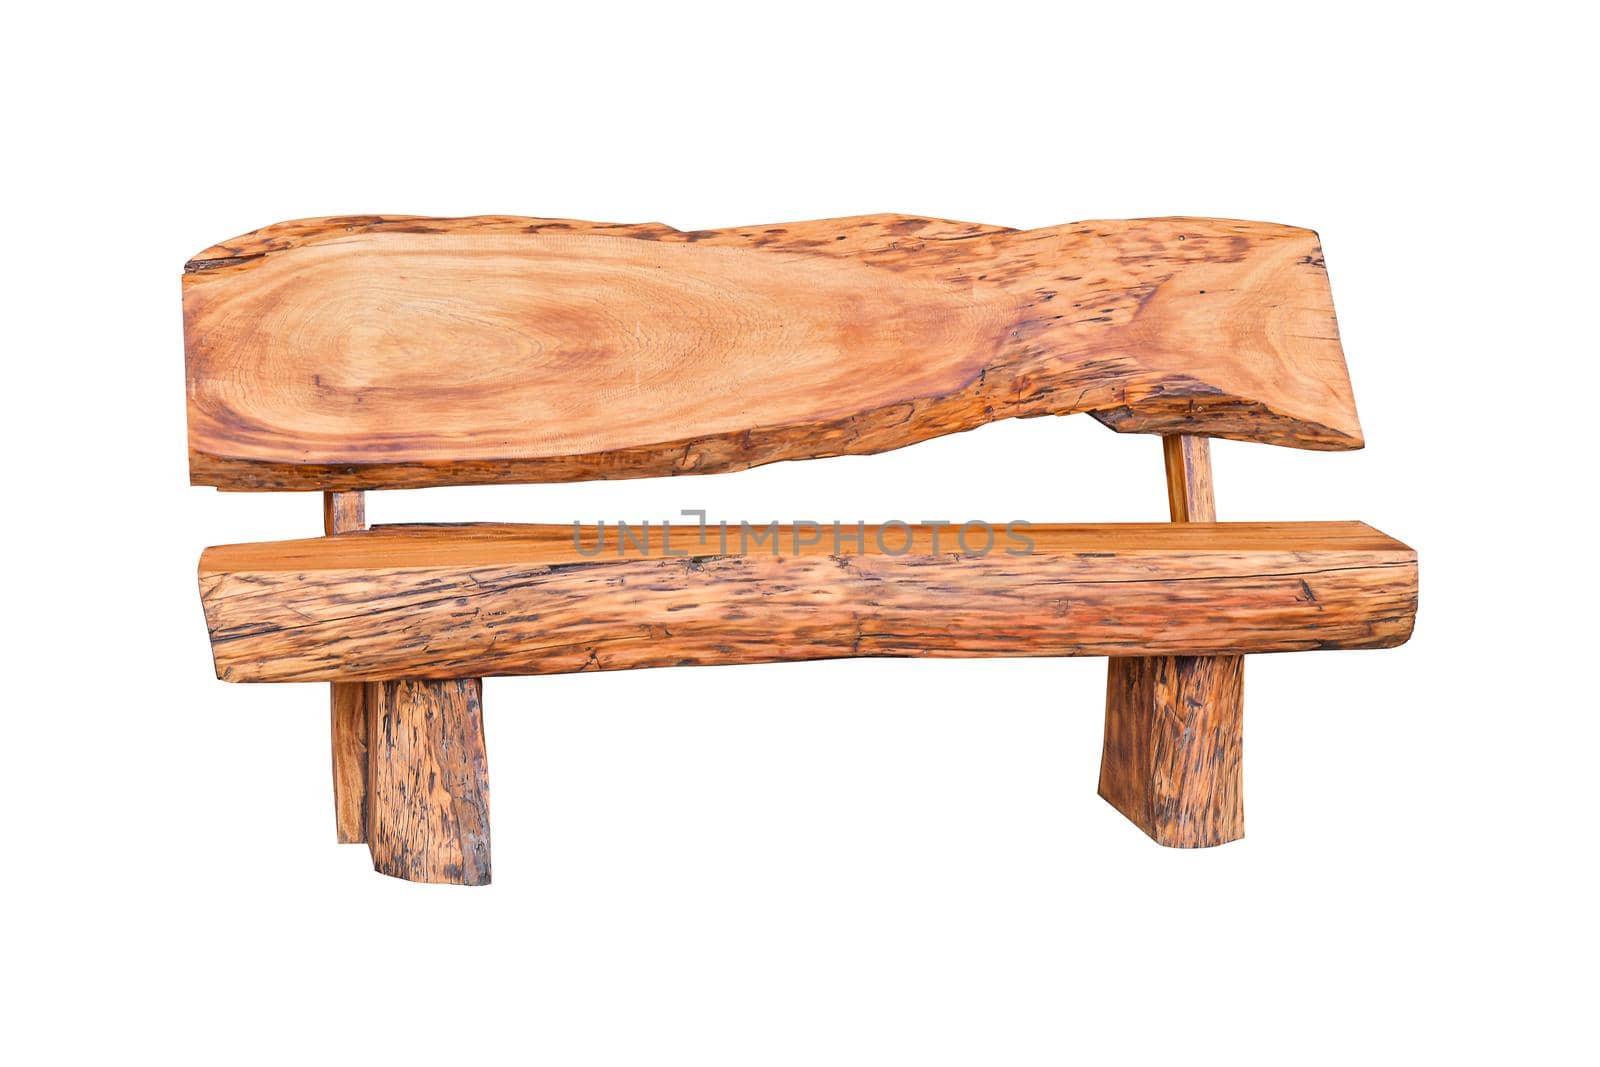 Wooden bench isolated on white background with clipping path.